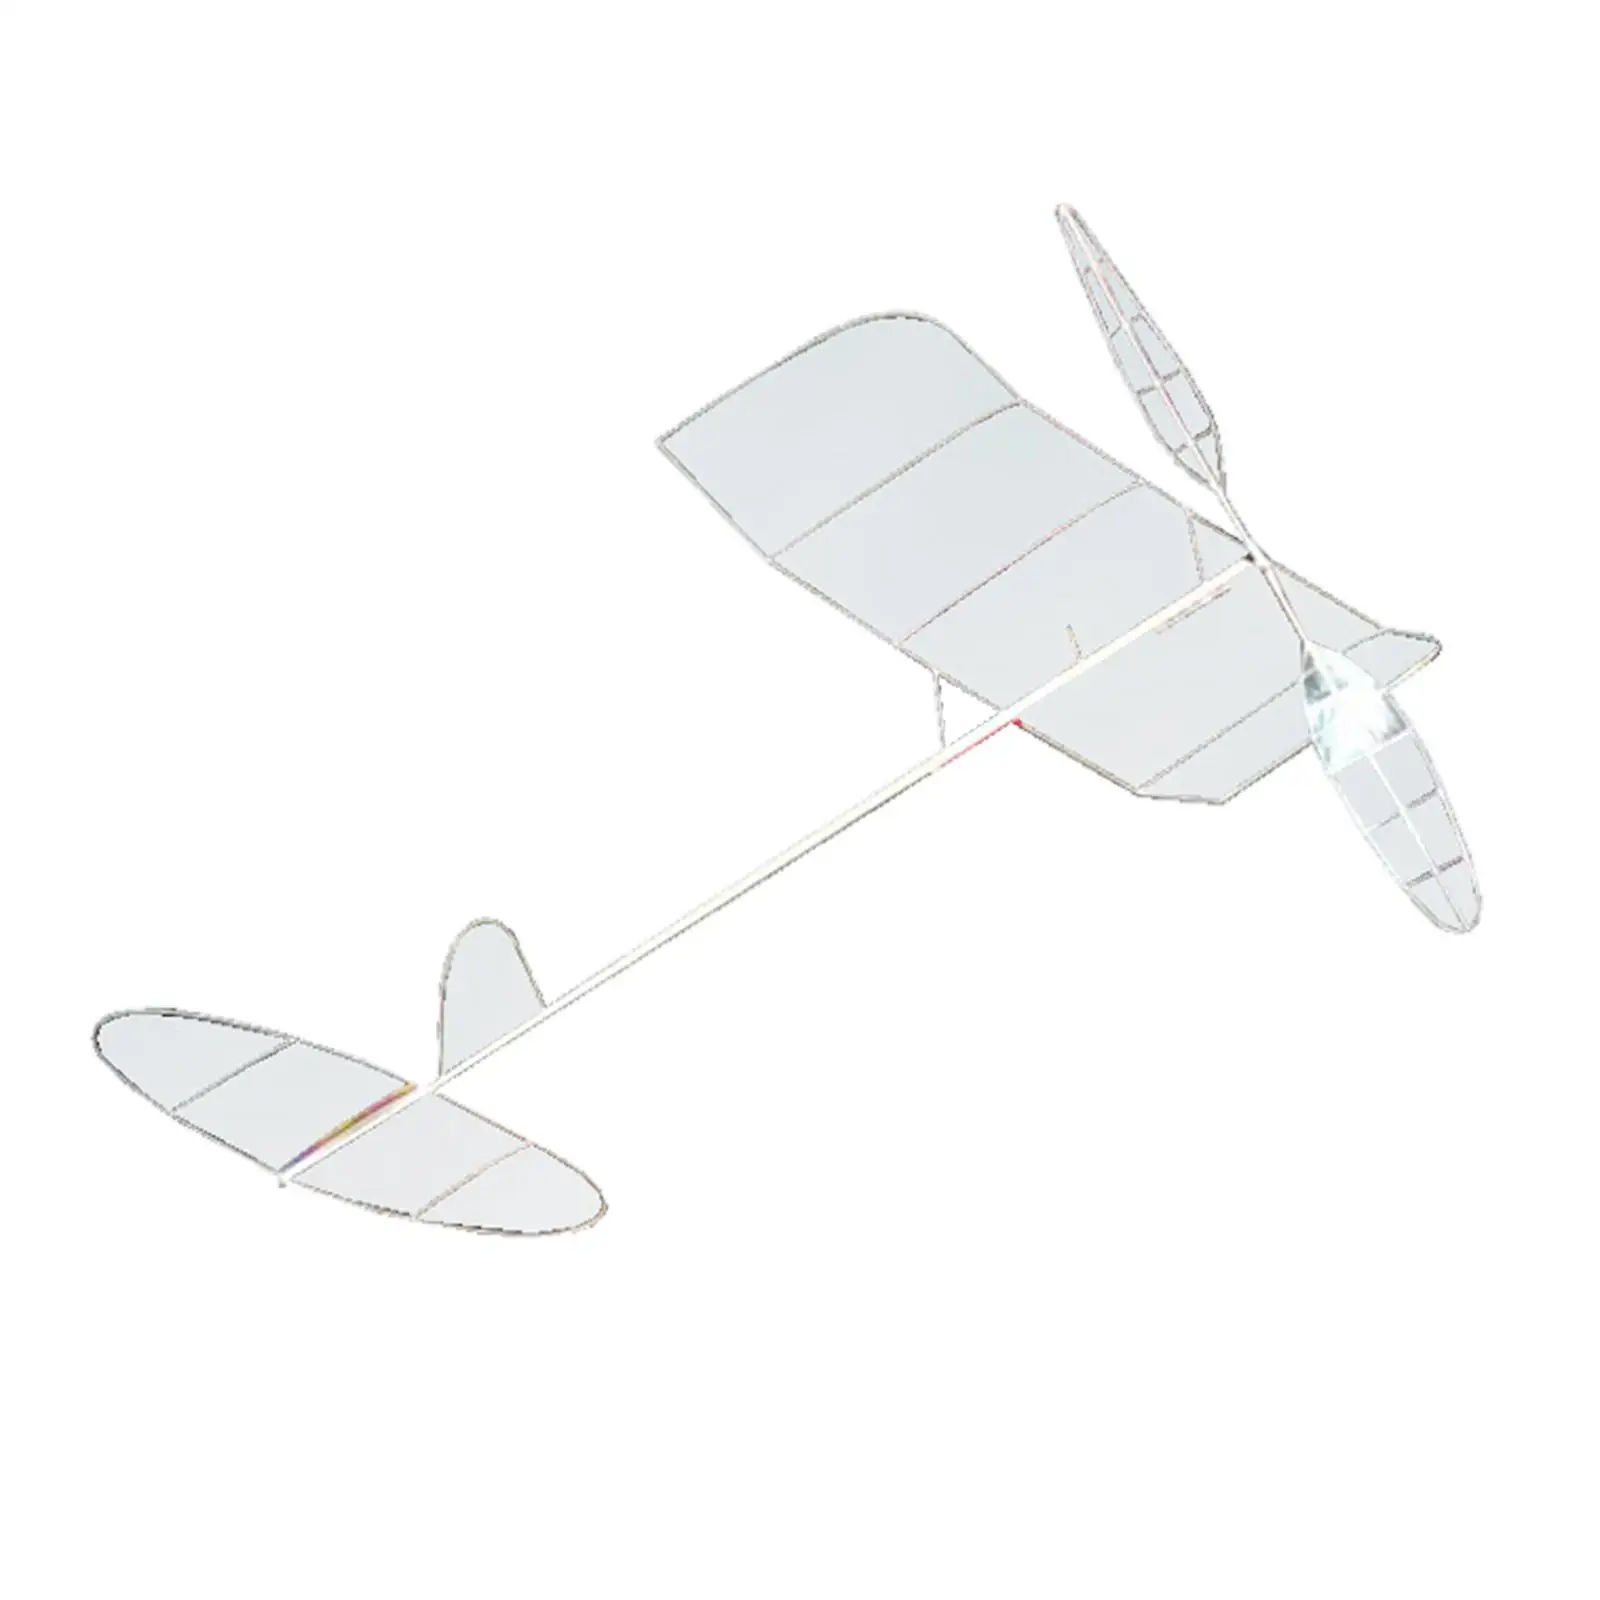 Elastic Powered Airplane Model Flying Toys Logical Thinking Rubber Band Powered Airplane for Park playground Sport Outdoor